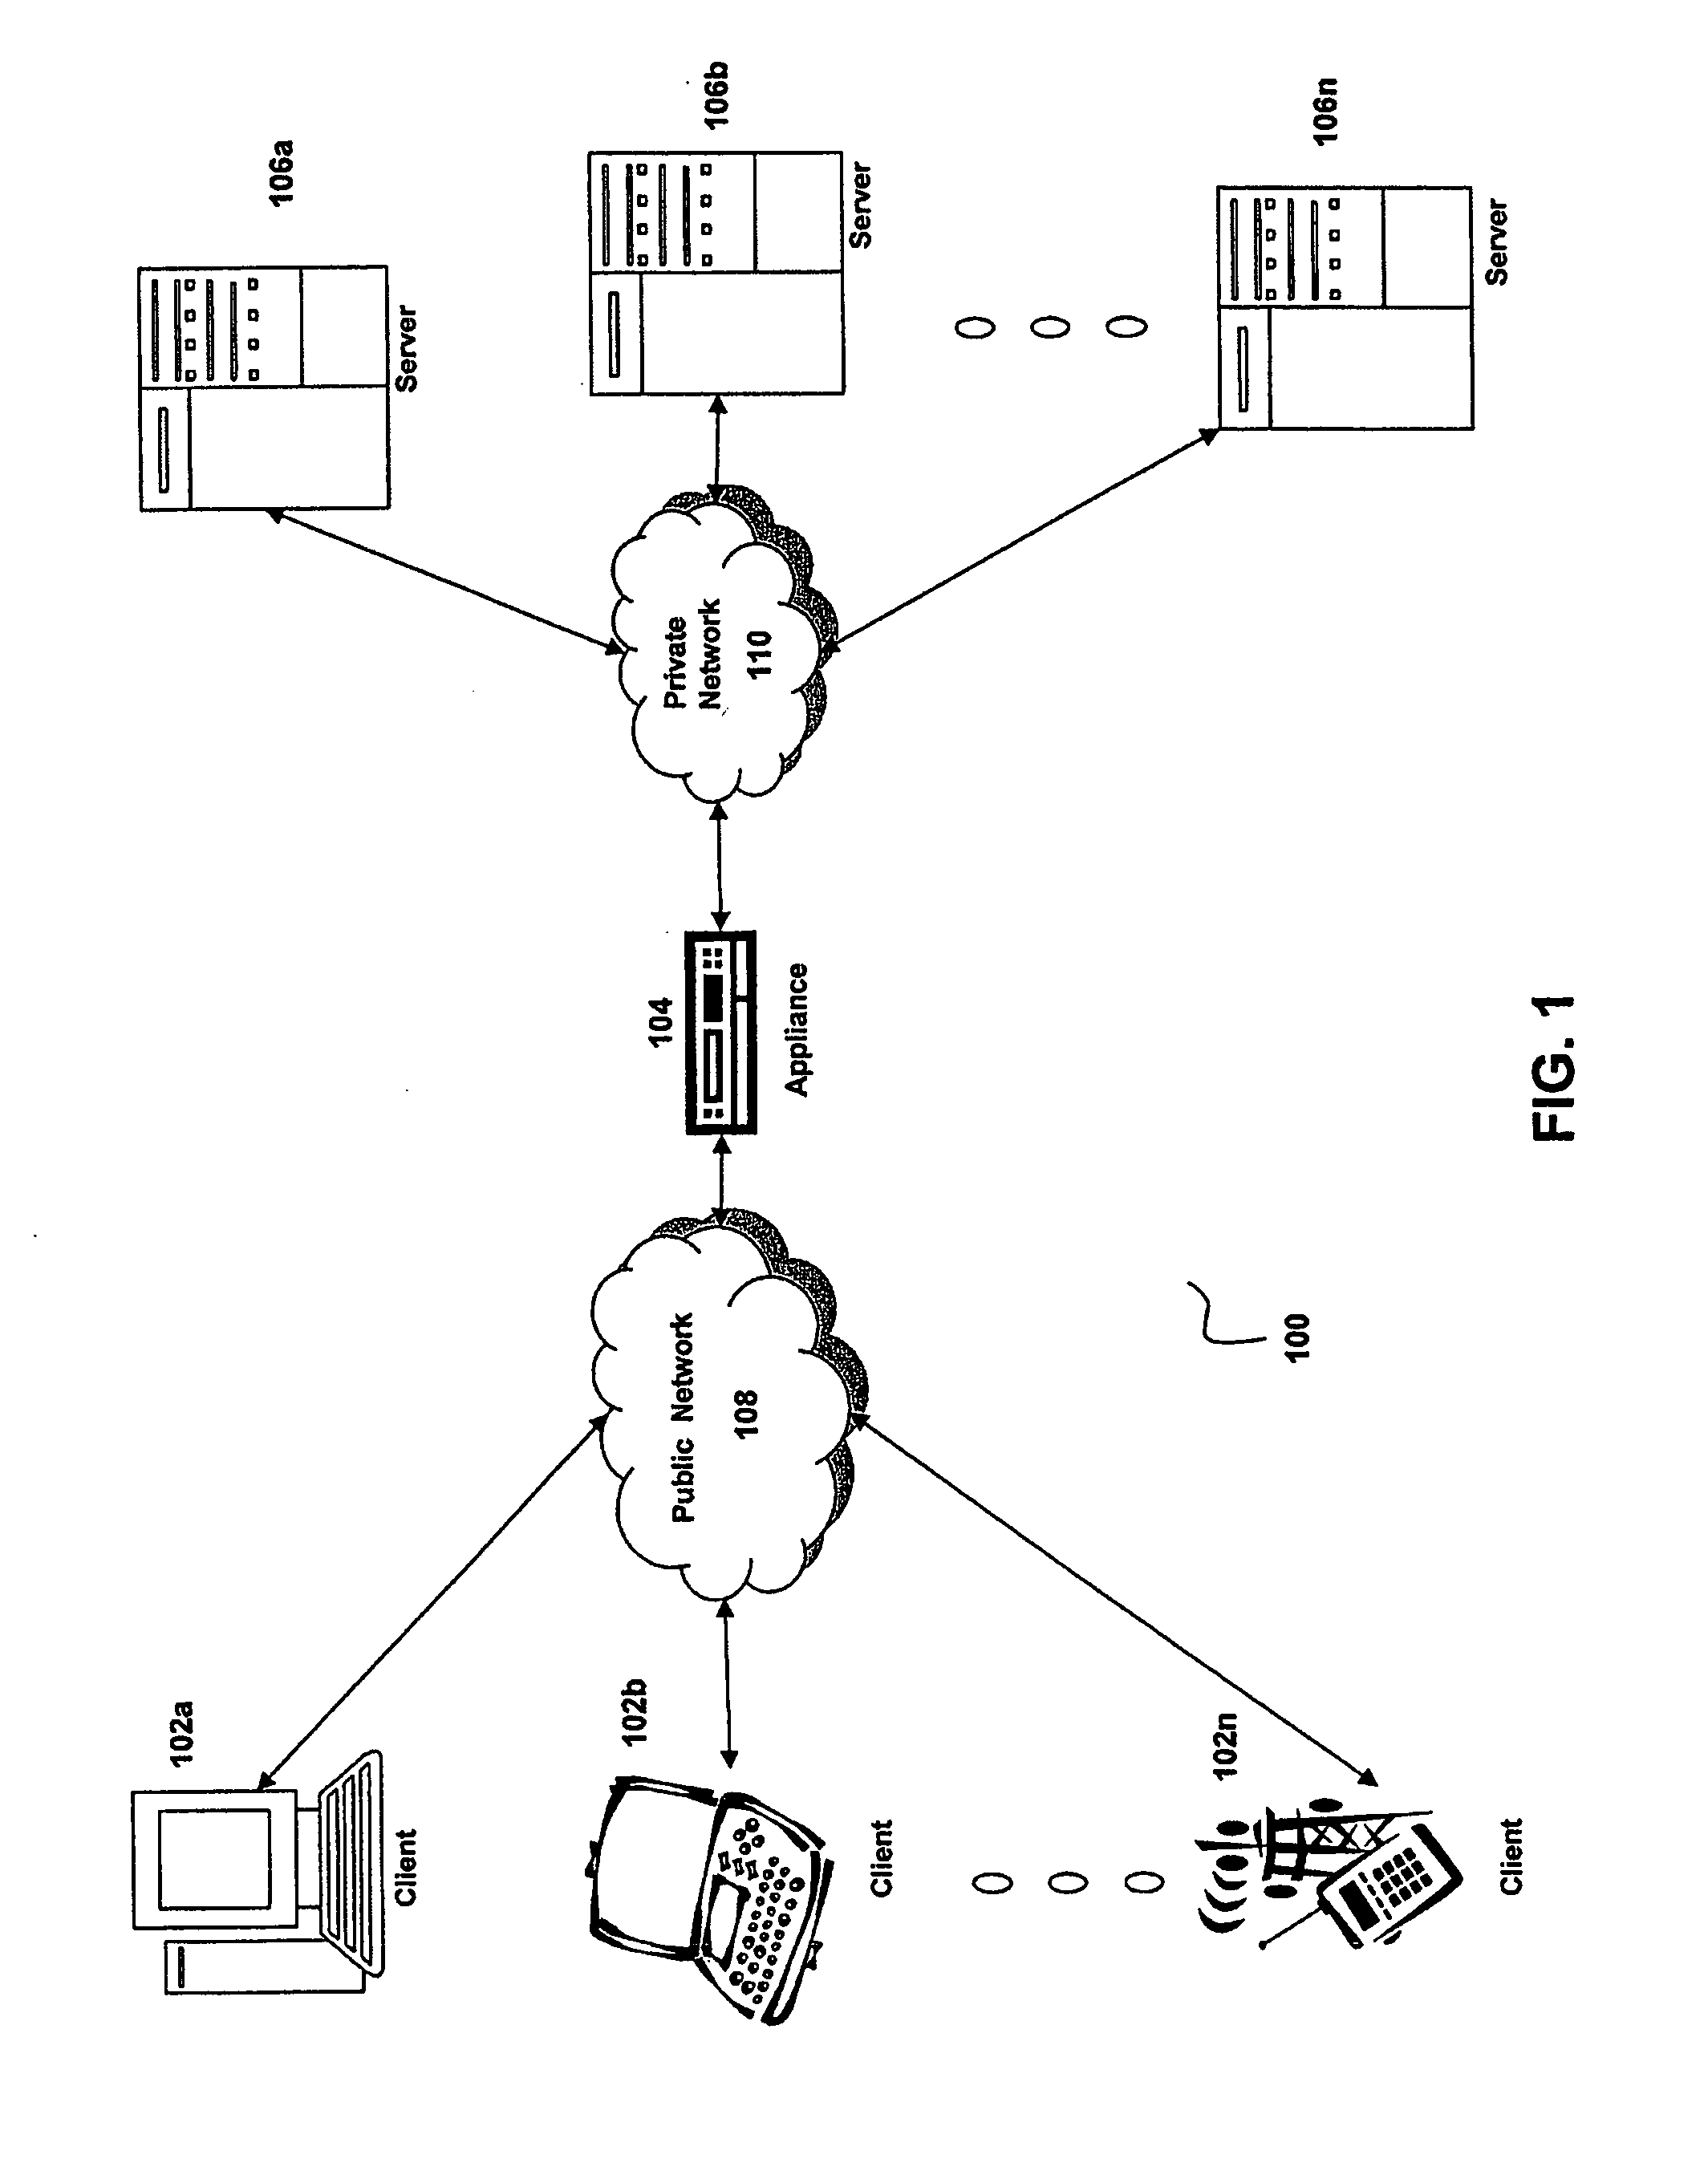 System and method for performing flash crowd caching of dynamically generated objects in a data communication network